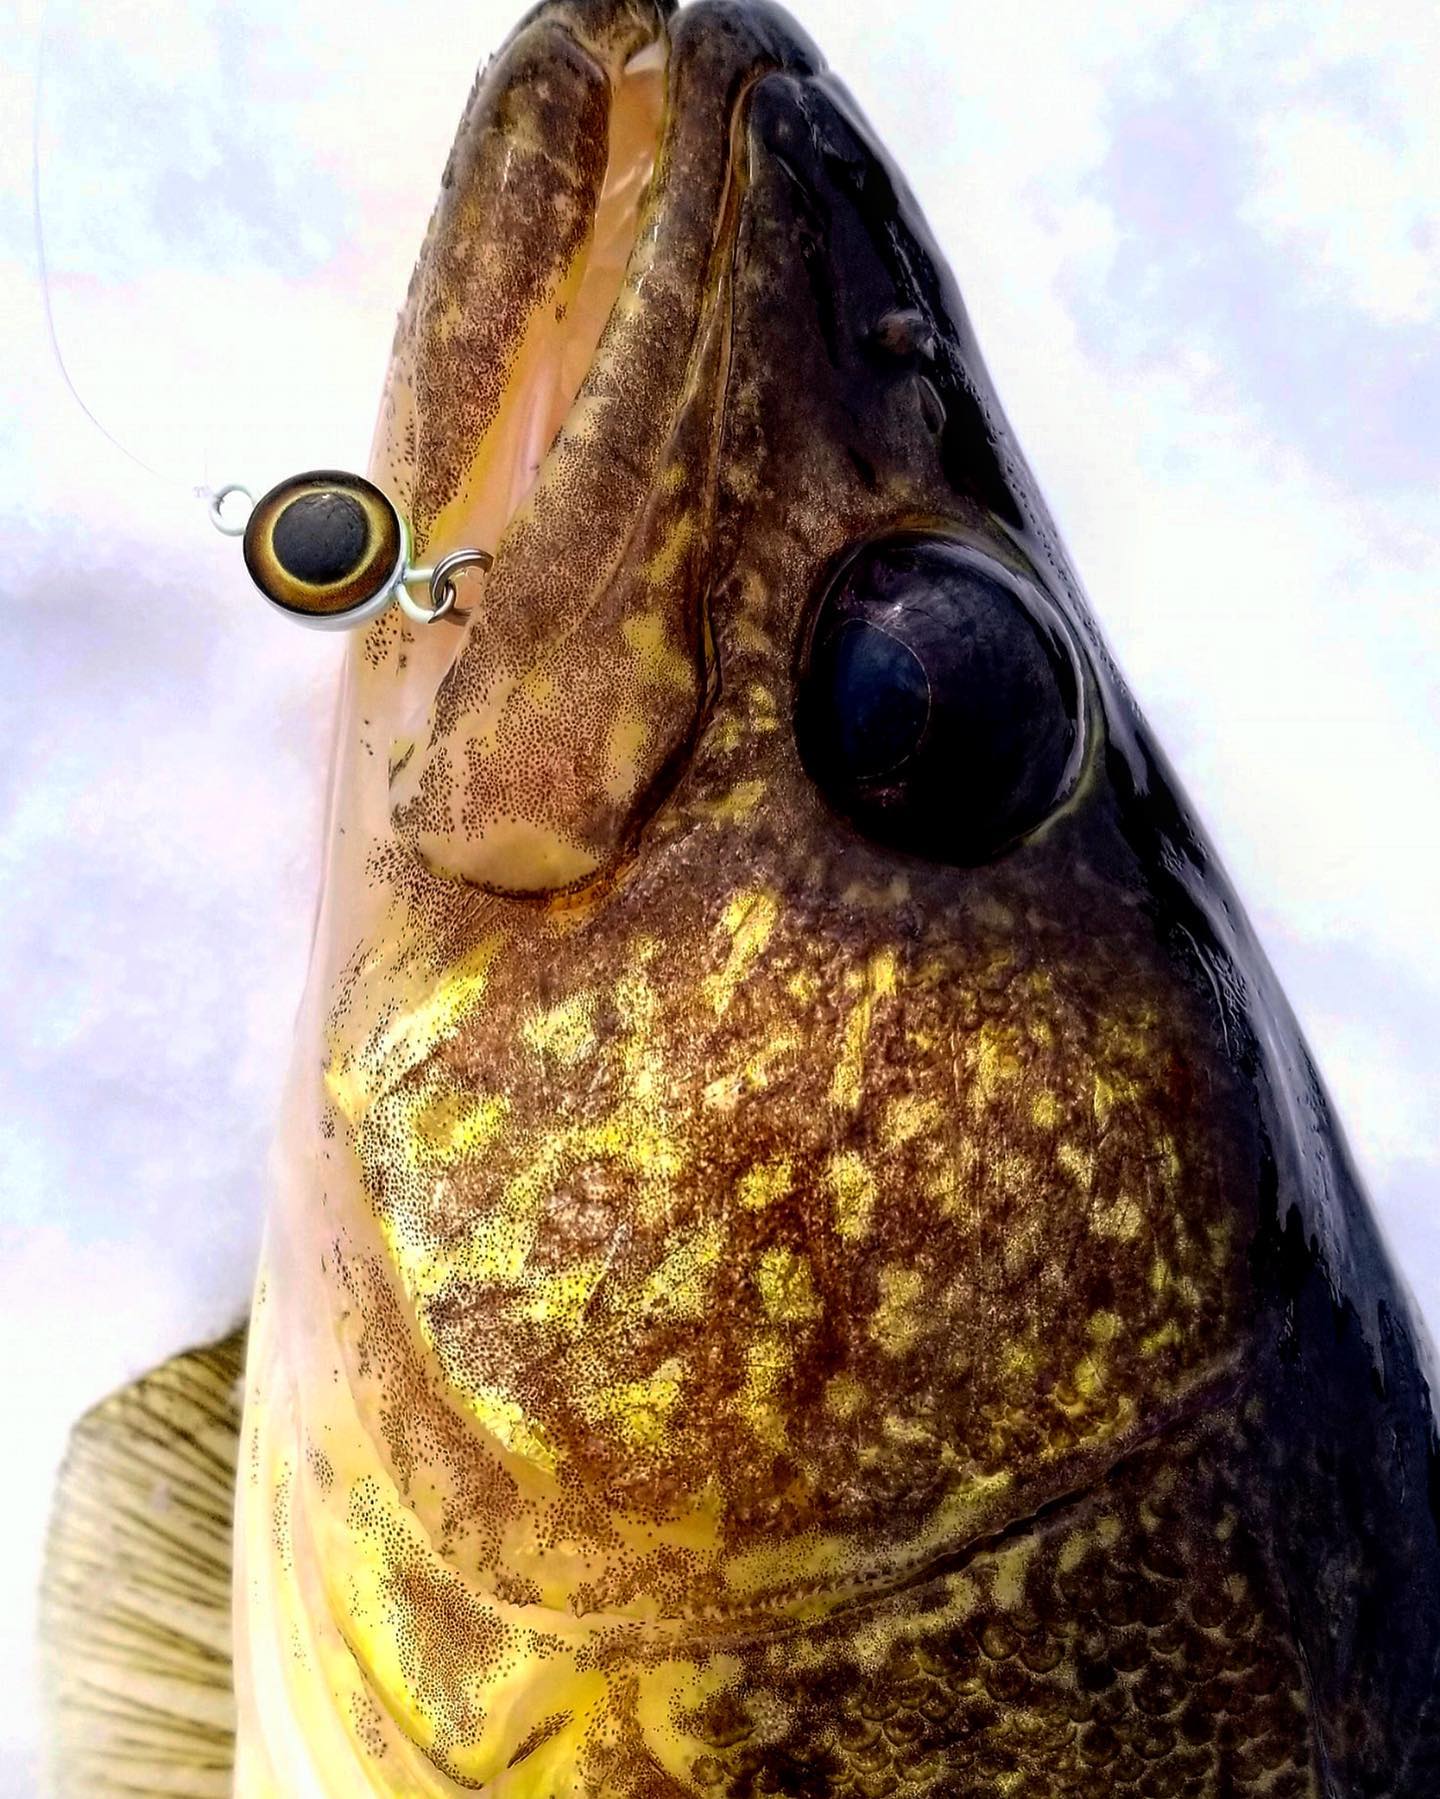 Ice Fishing may be Tough; But the Devils Lake Fish are Still Biting